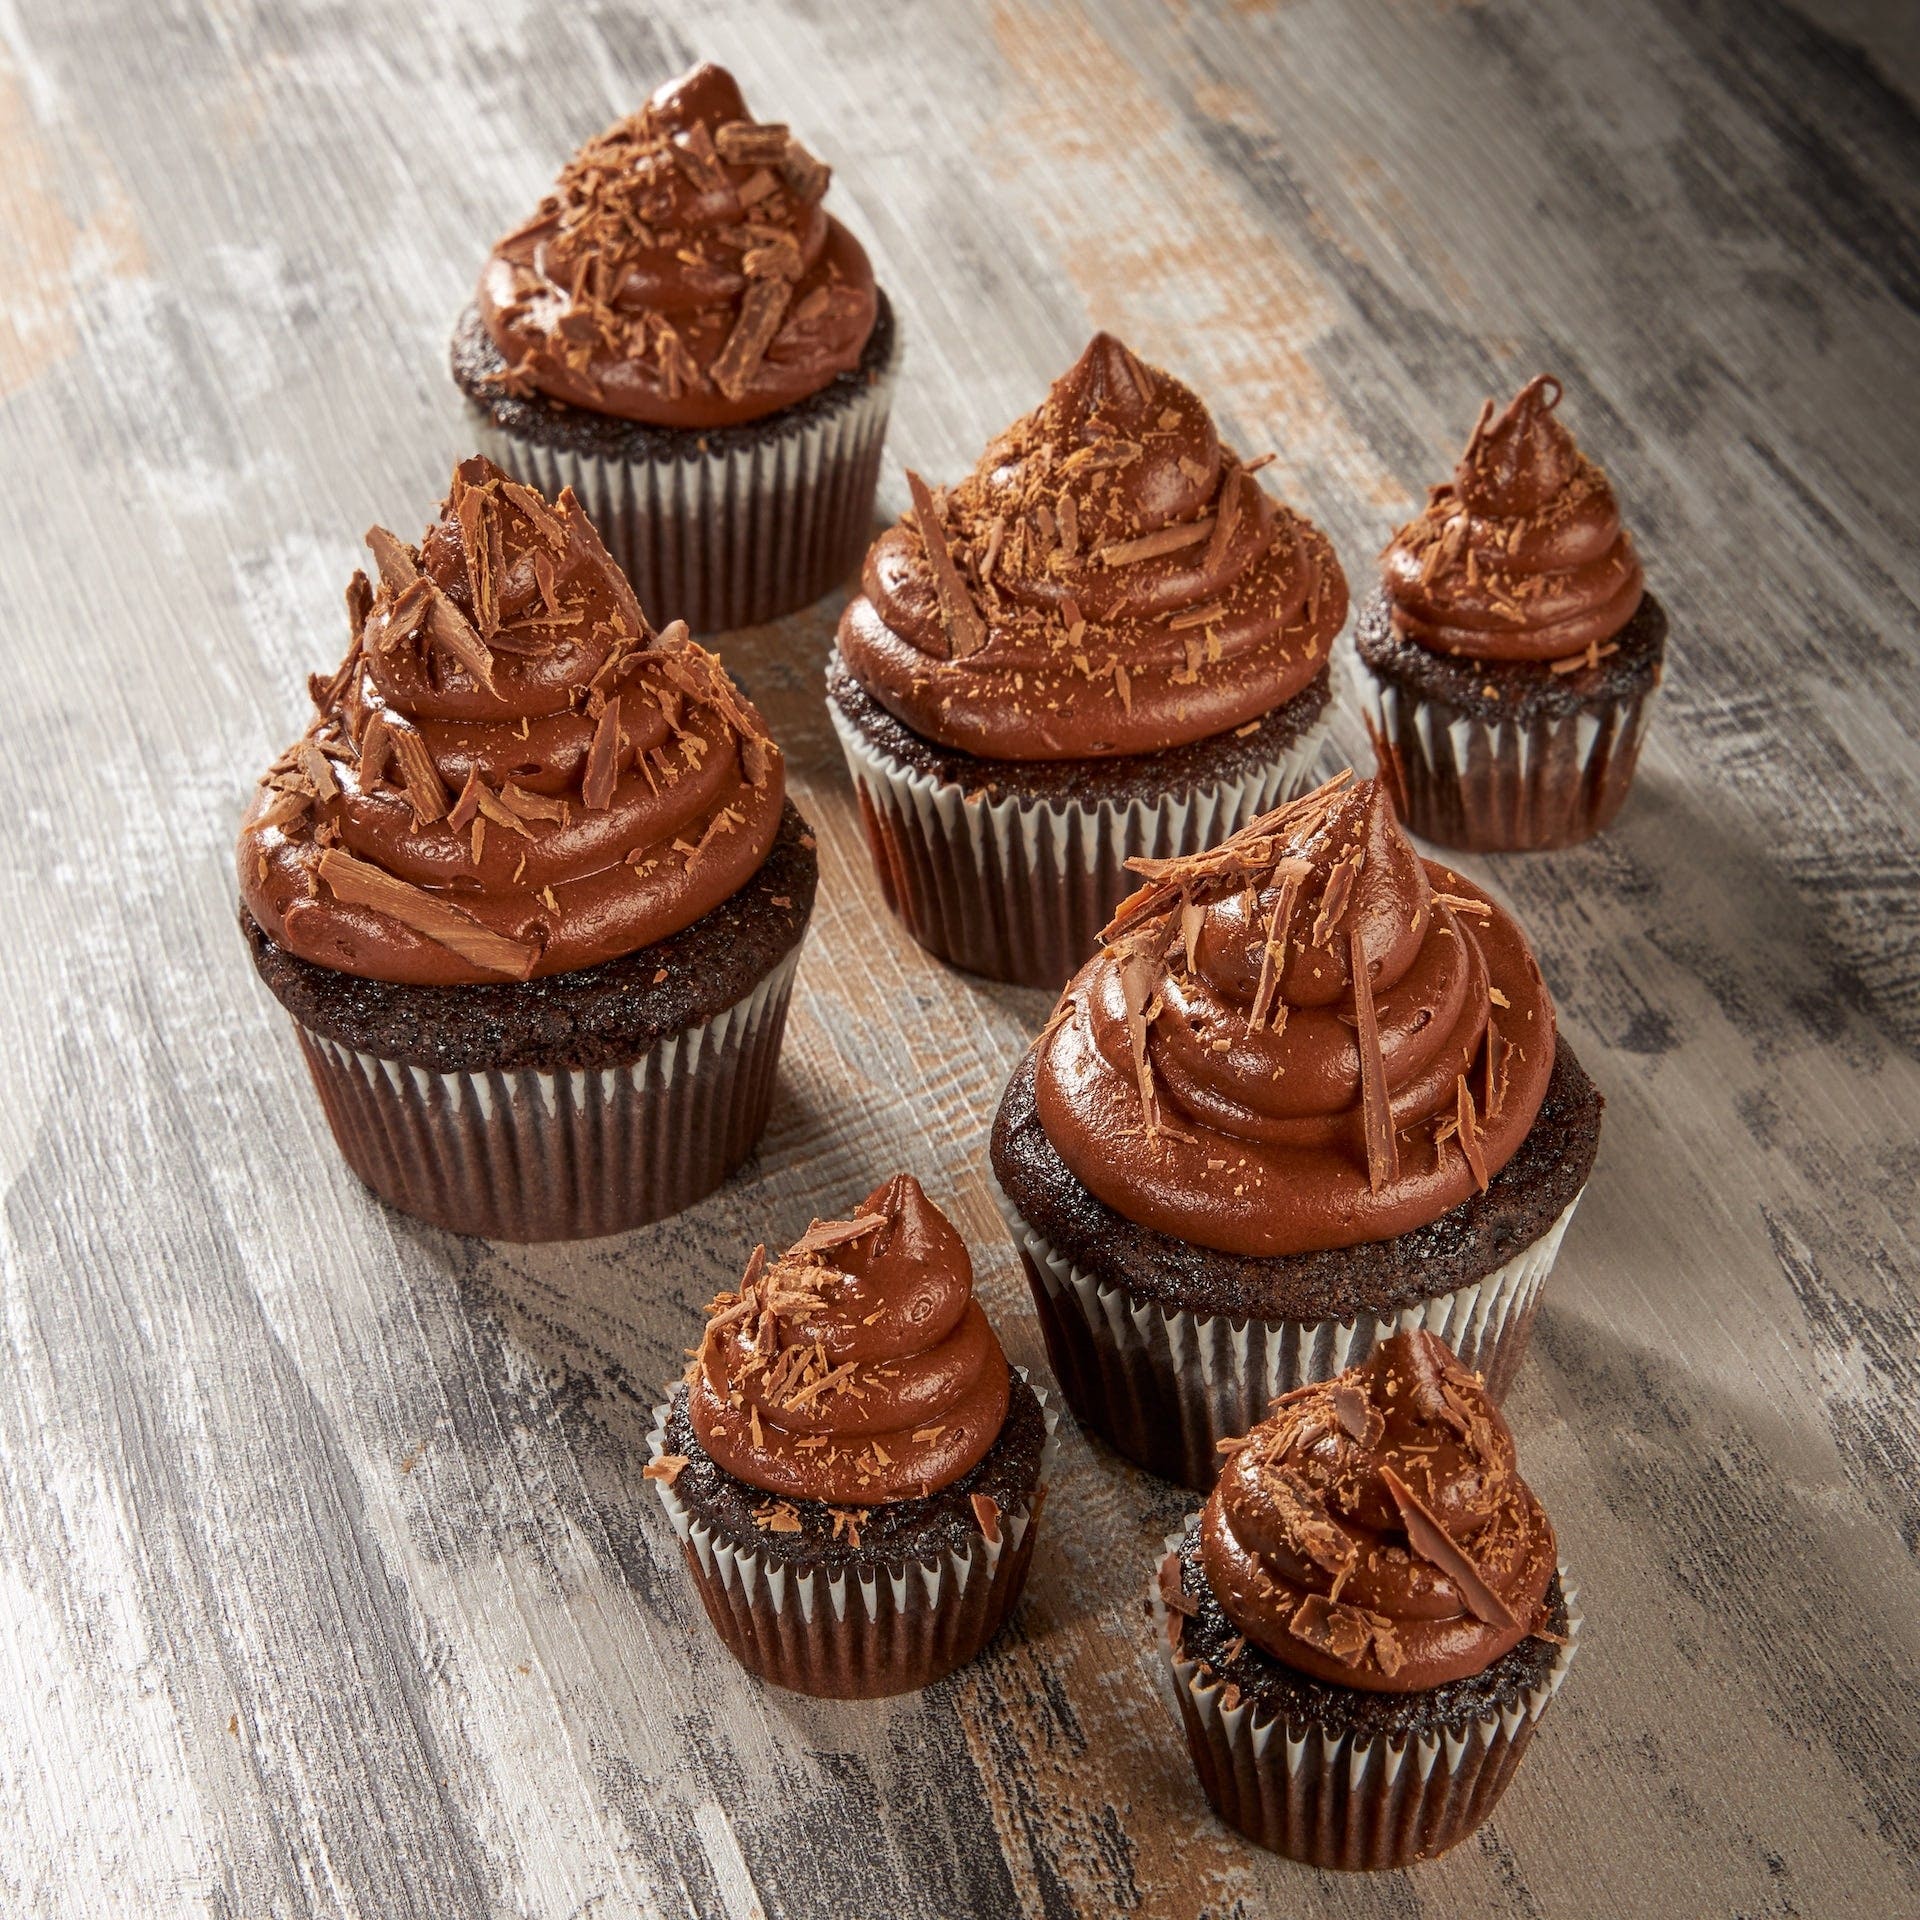 Commercial HERSHEY'S Mini Chocolate Cupcakes